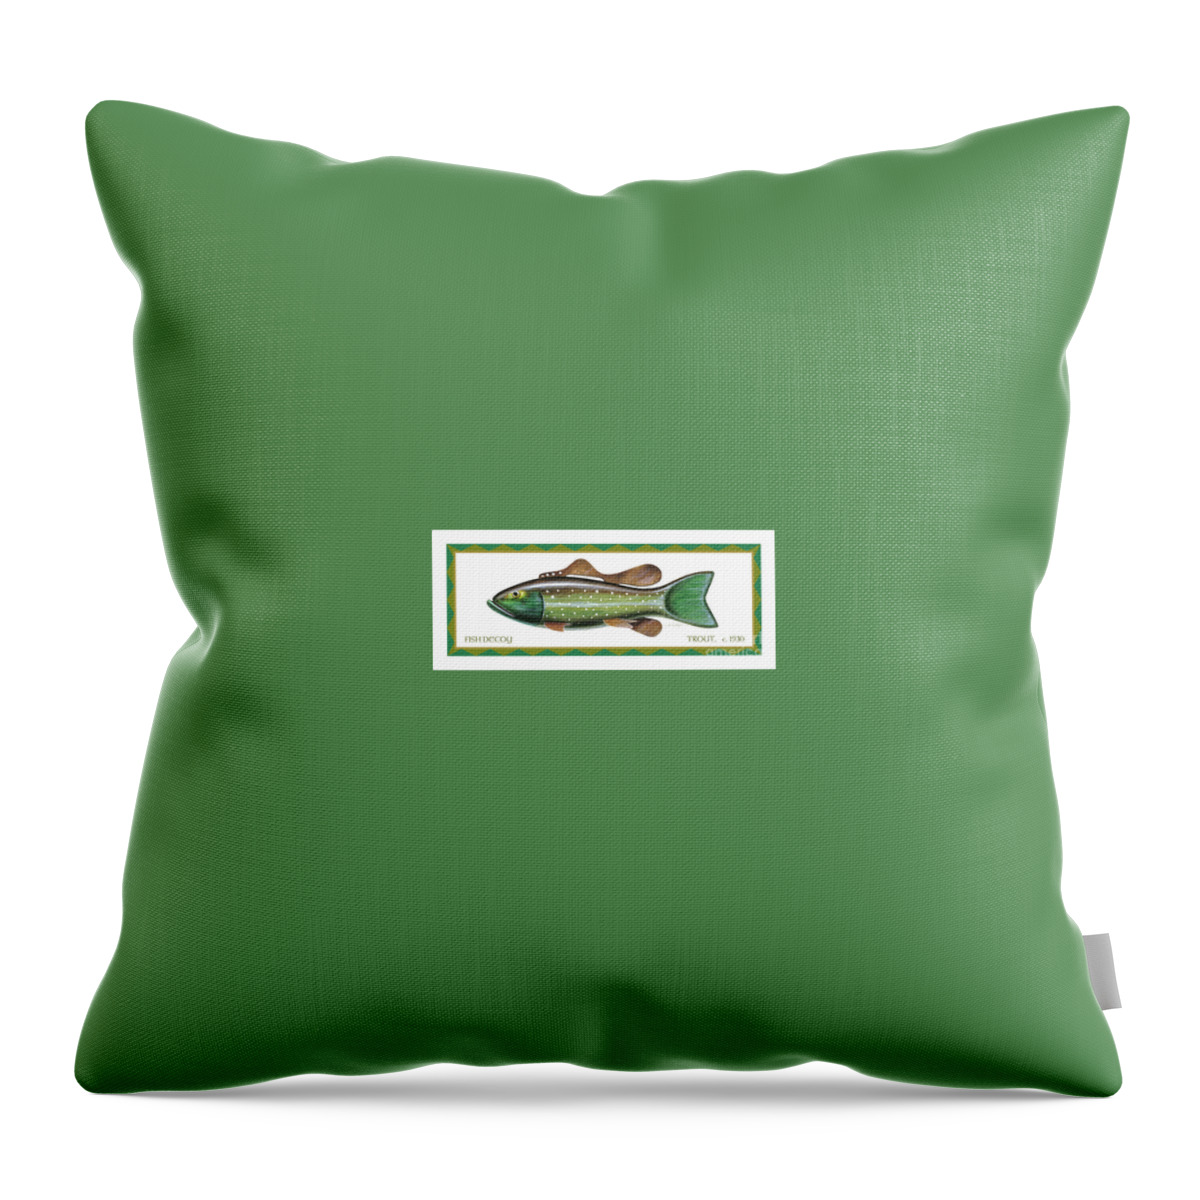 Jq Licensing Throw Pillow featuring the painting Trout Ice Fishing Decoy by Jon Q Wright